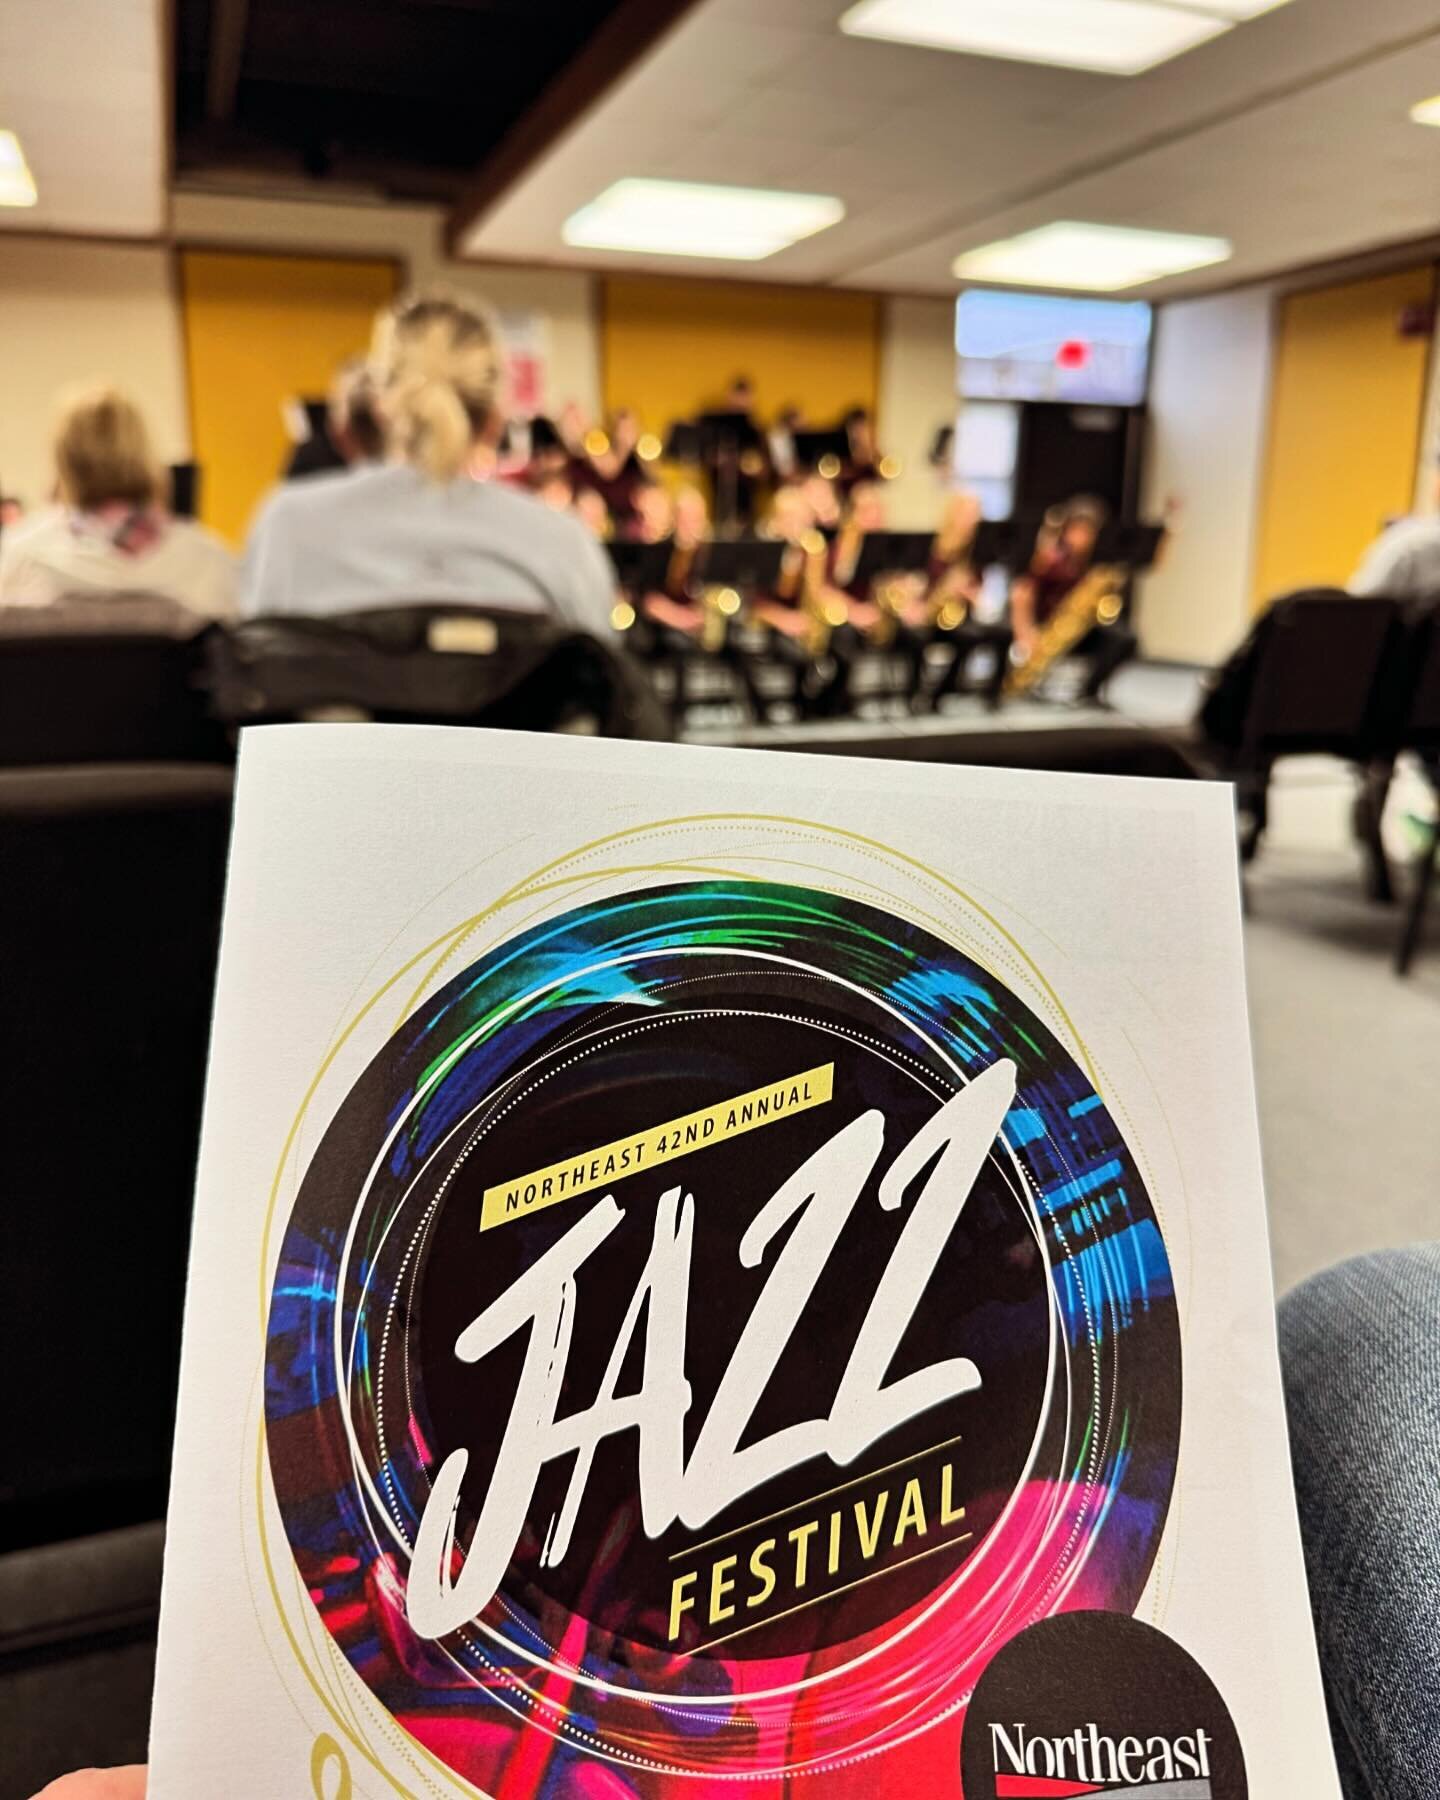 Great representation by the Norfolk Junior High Jazz bands today at the 42nd Annual Northeast Jazz Festival!  Way to go!
#norfolkpublicschools #norfolkpublicschoolsnebraska #npspanthers #norfolkjuniorhigh #jazzband #northeastcommunitycollege #beoutst